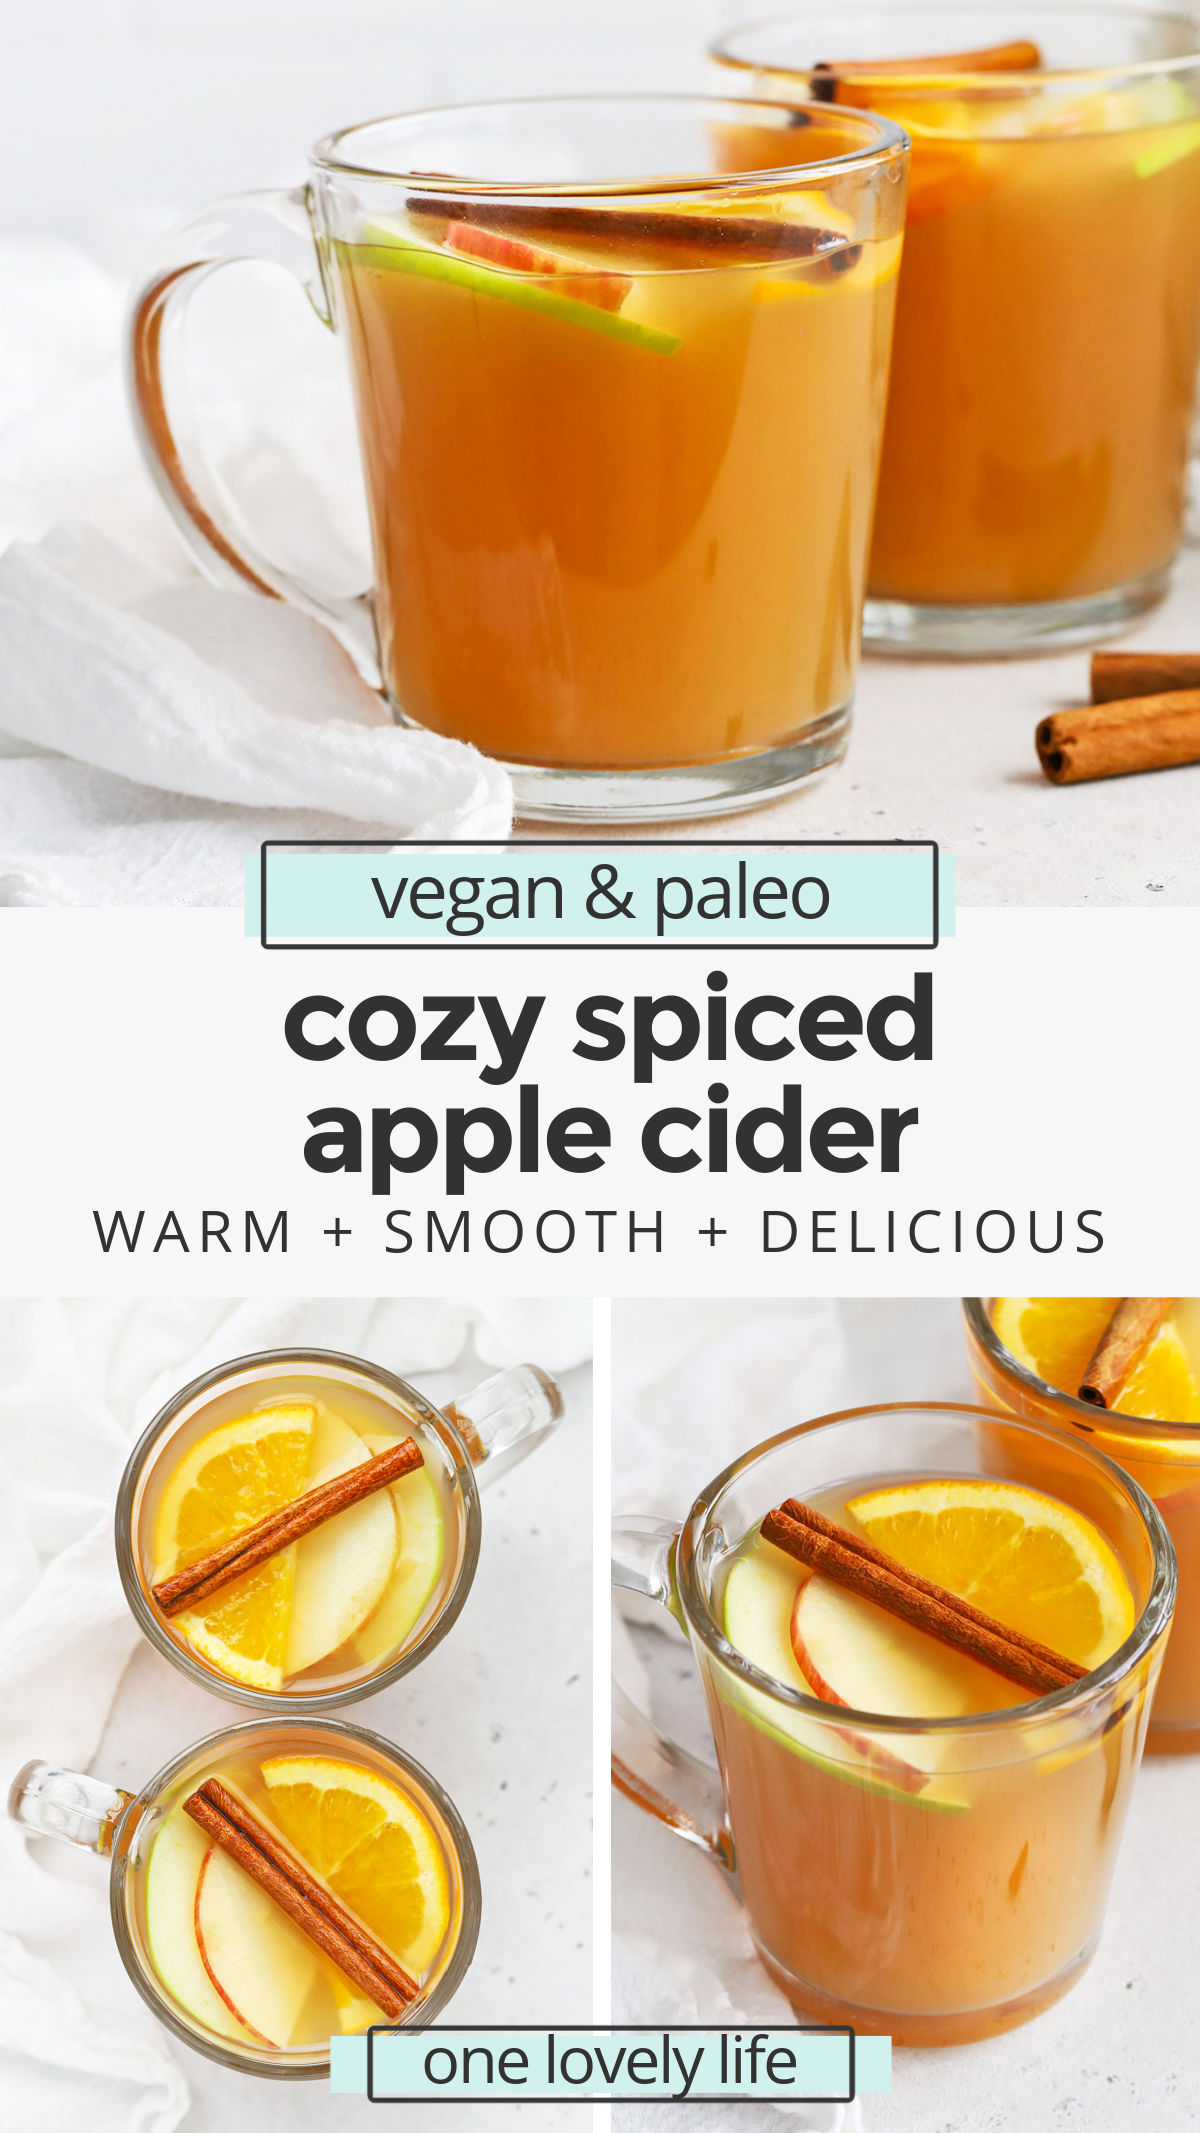 Cozy Spiced Cider - This easy spiced apple cider recipe smells and tastes incredible. The perfect blend of flavors and spices! (Naturally paleo & Vegan) // Spiced Cider Recipe // Naturally sweetened spiced cider // healthy fall drink // warm drinks // holiday drinks // non-alcoholic drinks // Christmas cider drink // hot drinks // hot cider recipe / spiced cider recipe / mulled cider recipe